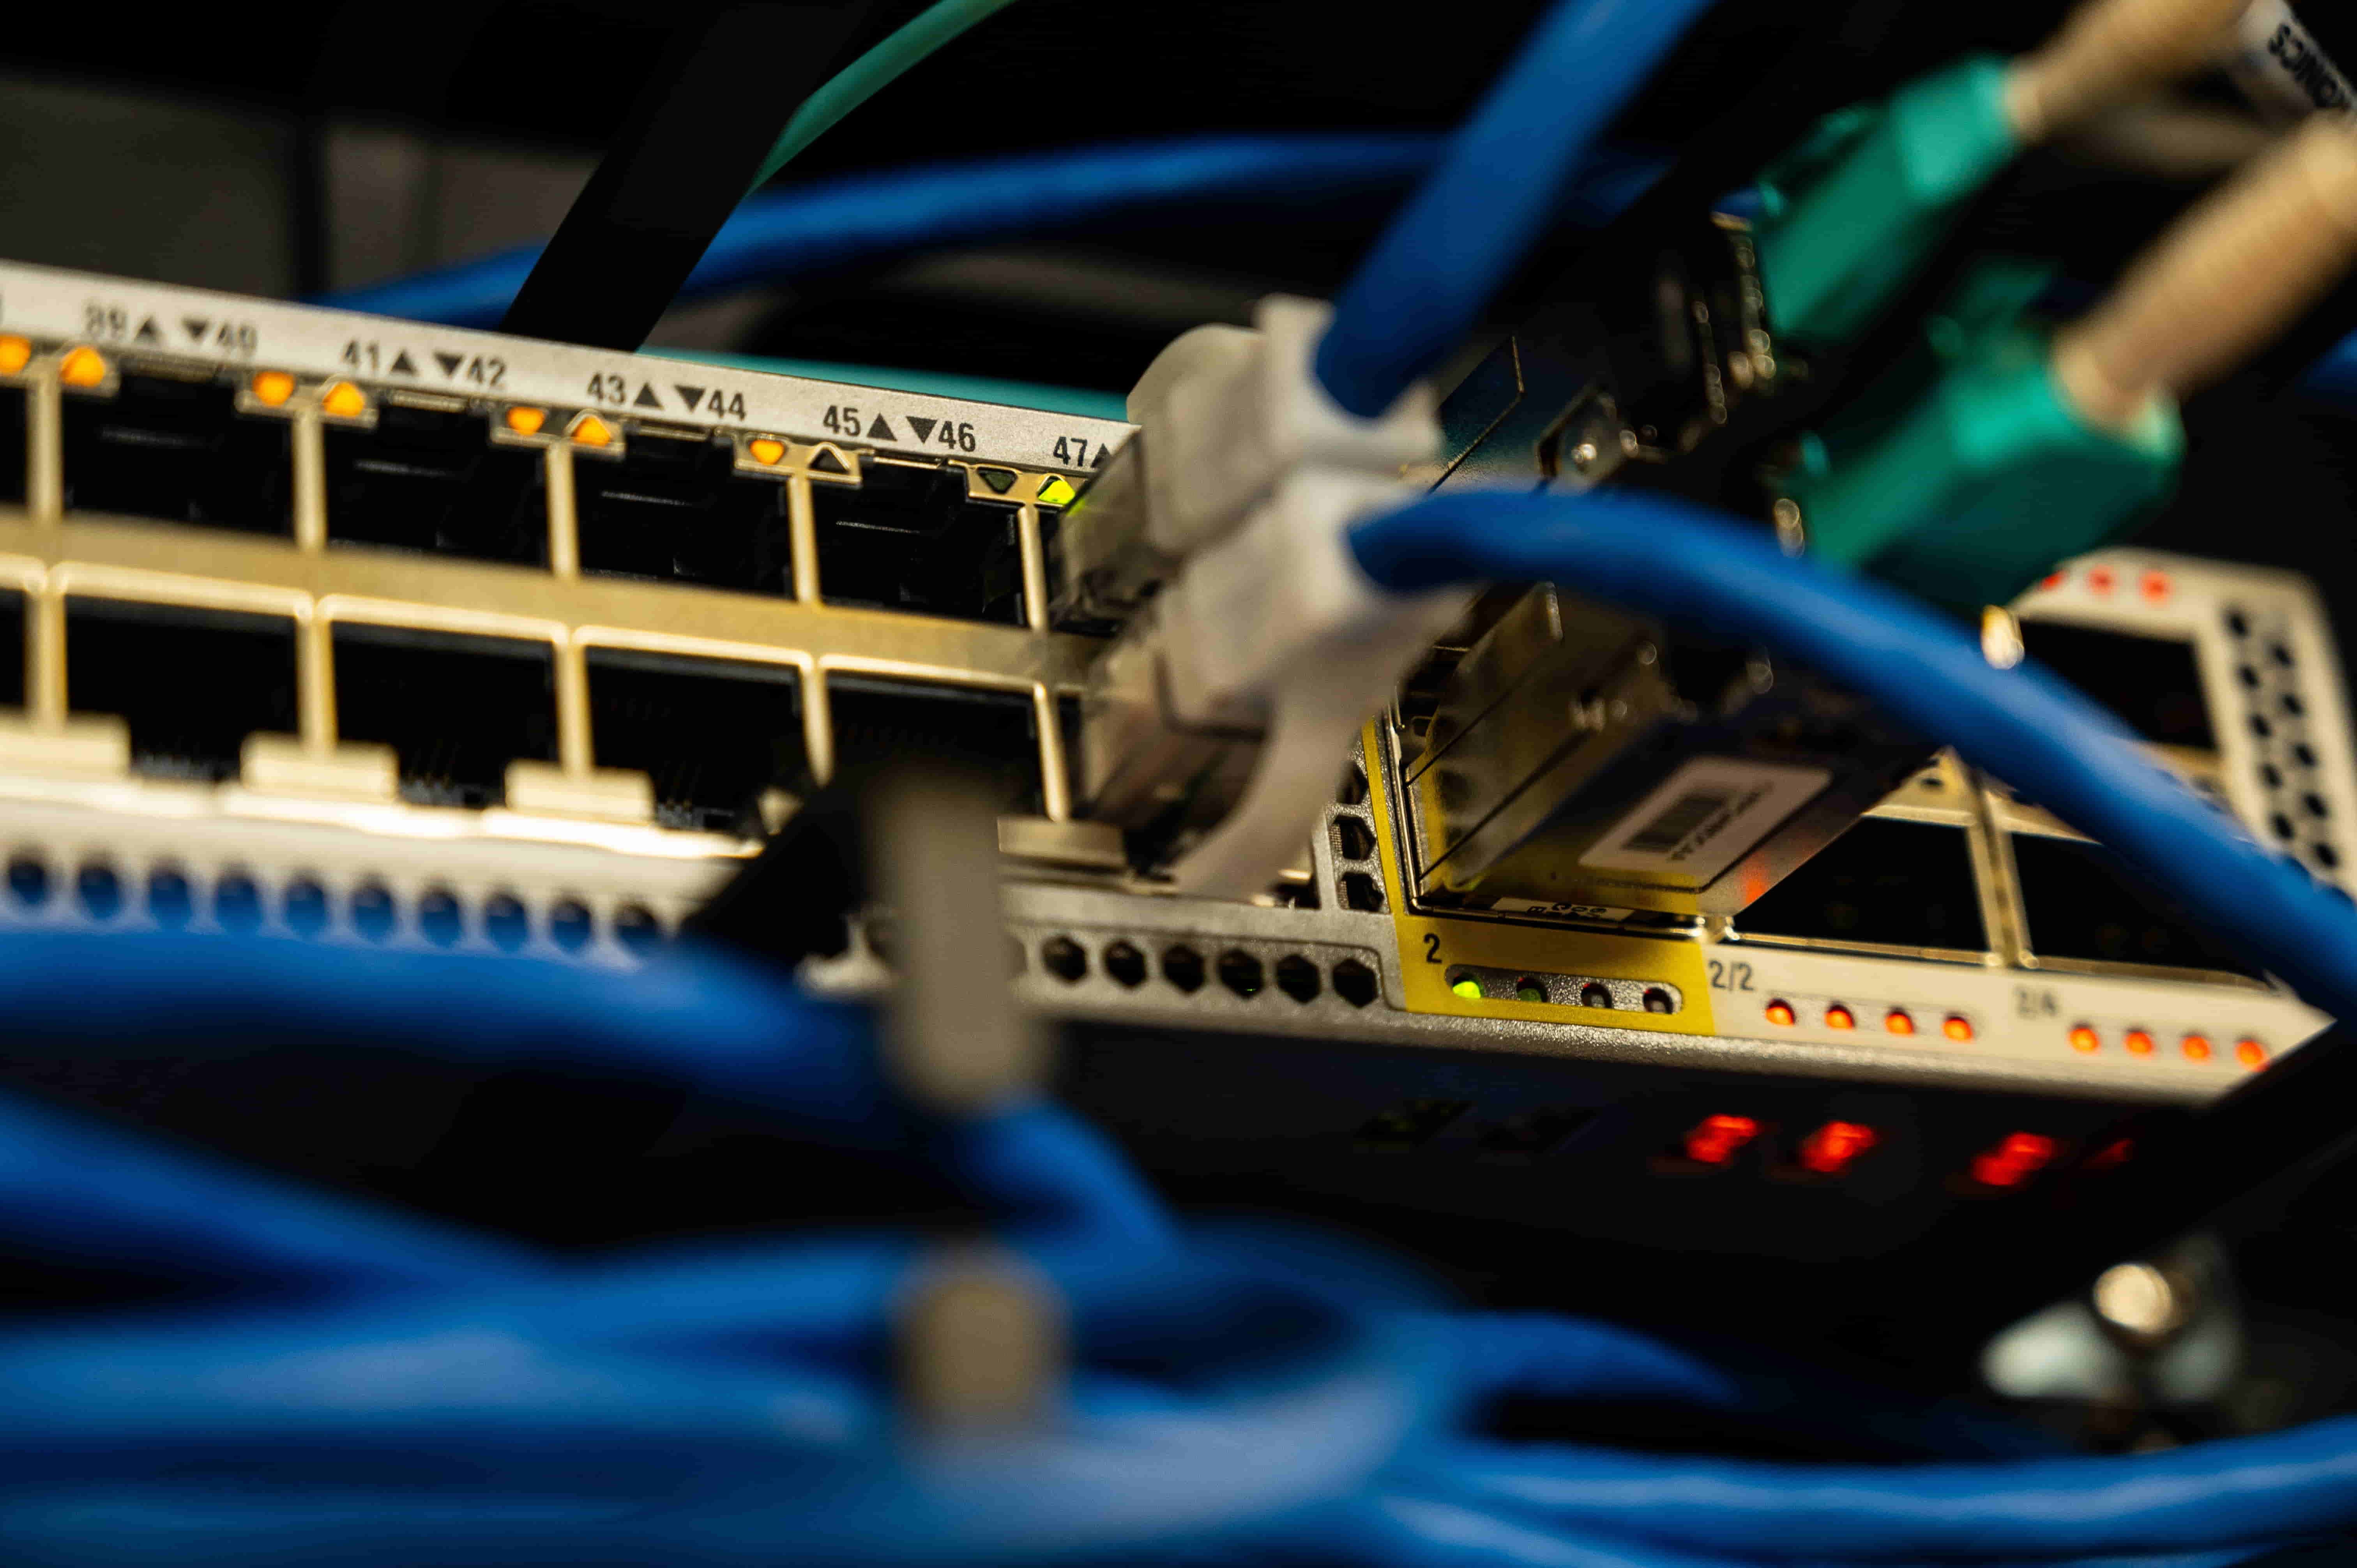 Perbedaan Unmanaged Switch dan Managed Switch